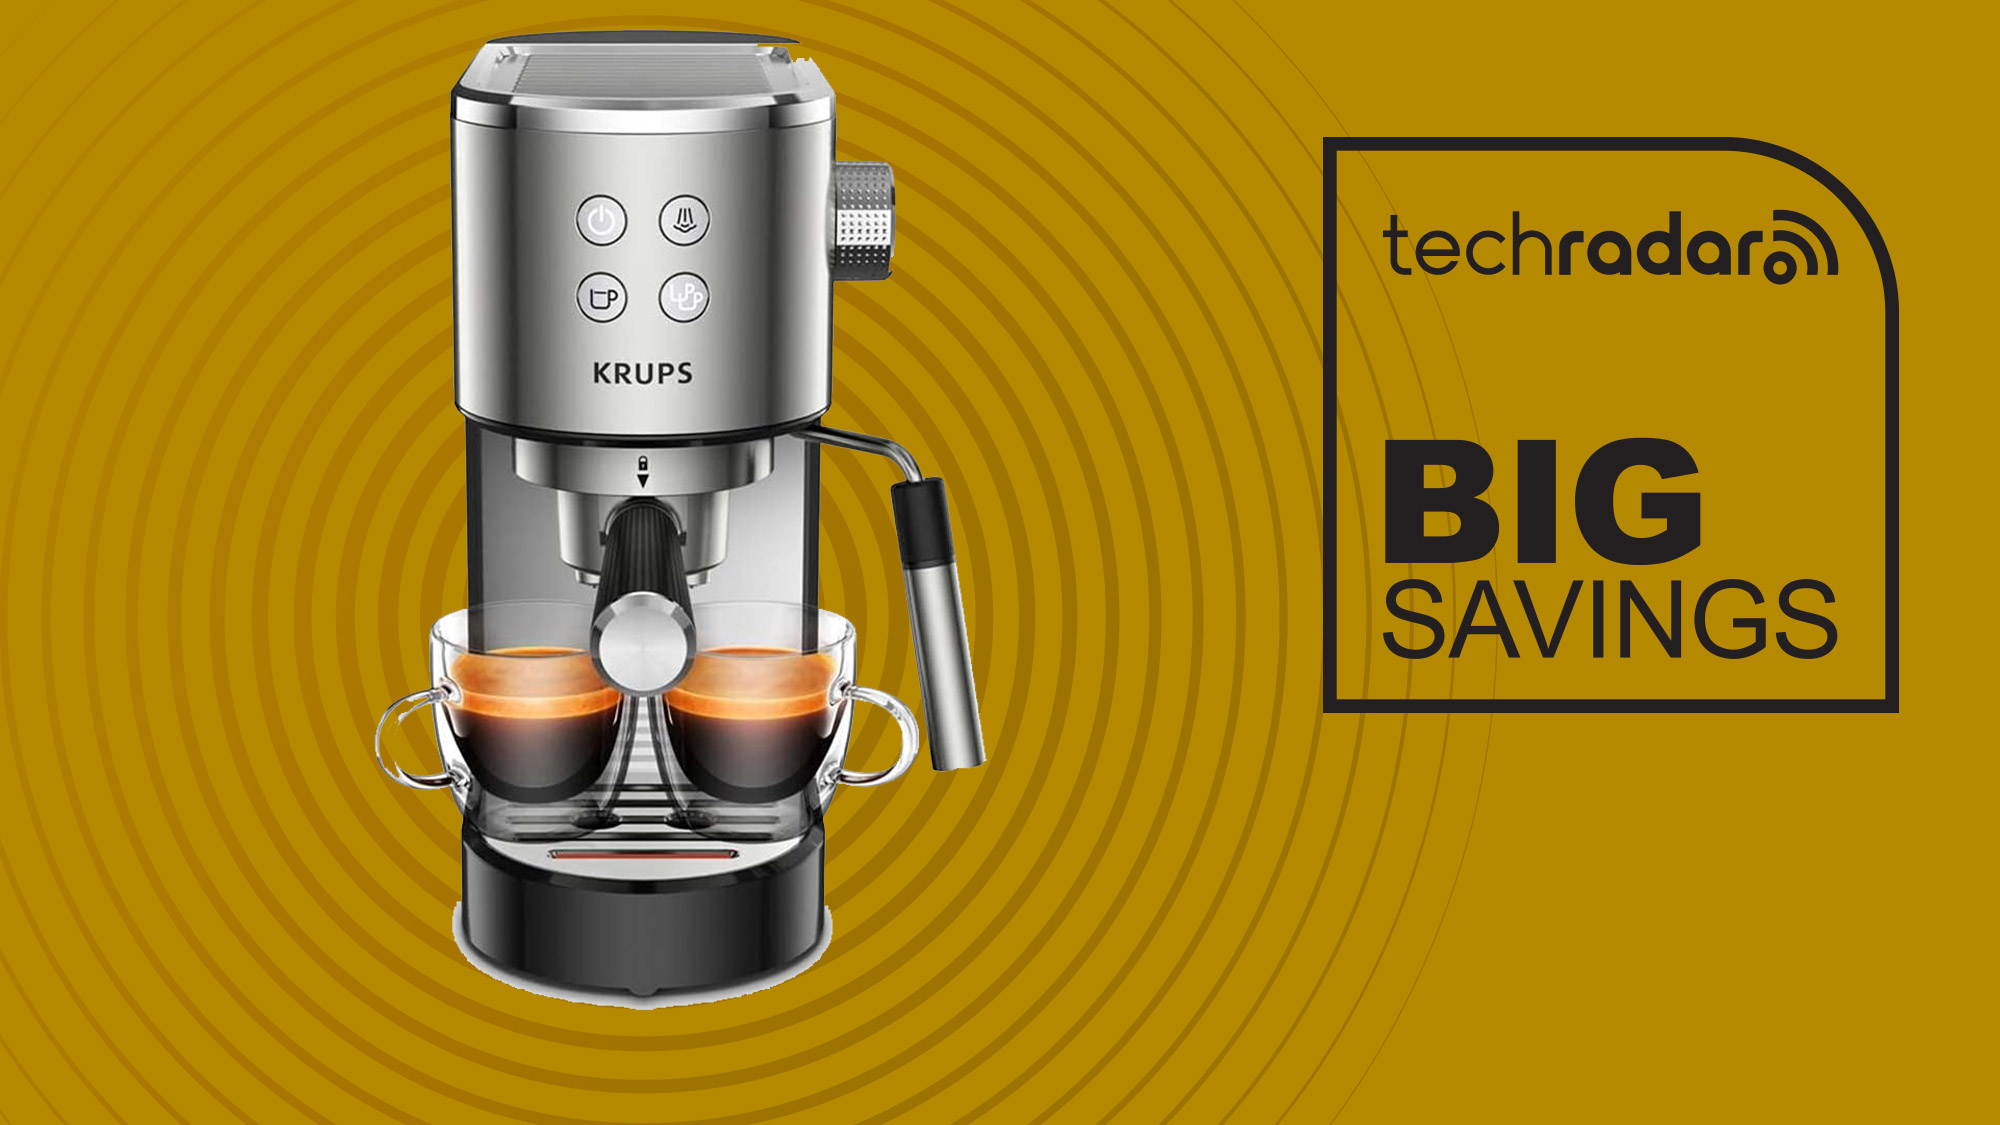 We made it our mission to find the best espresso machine Prime Day